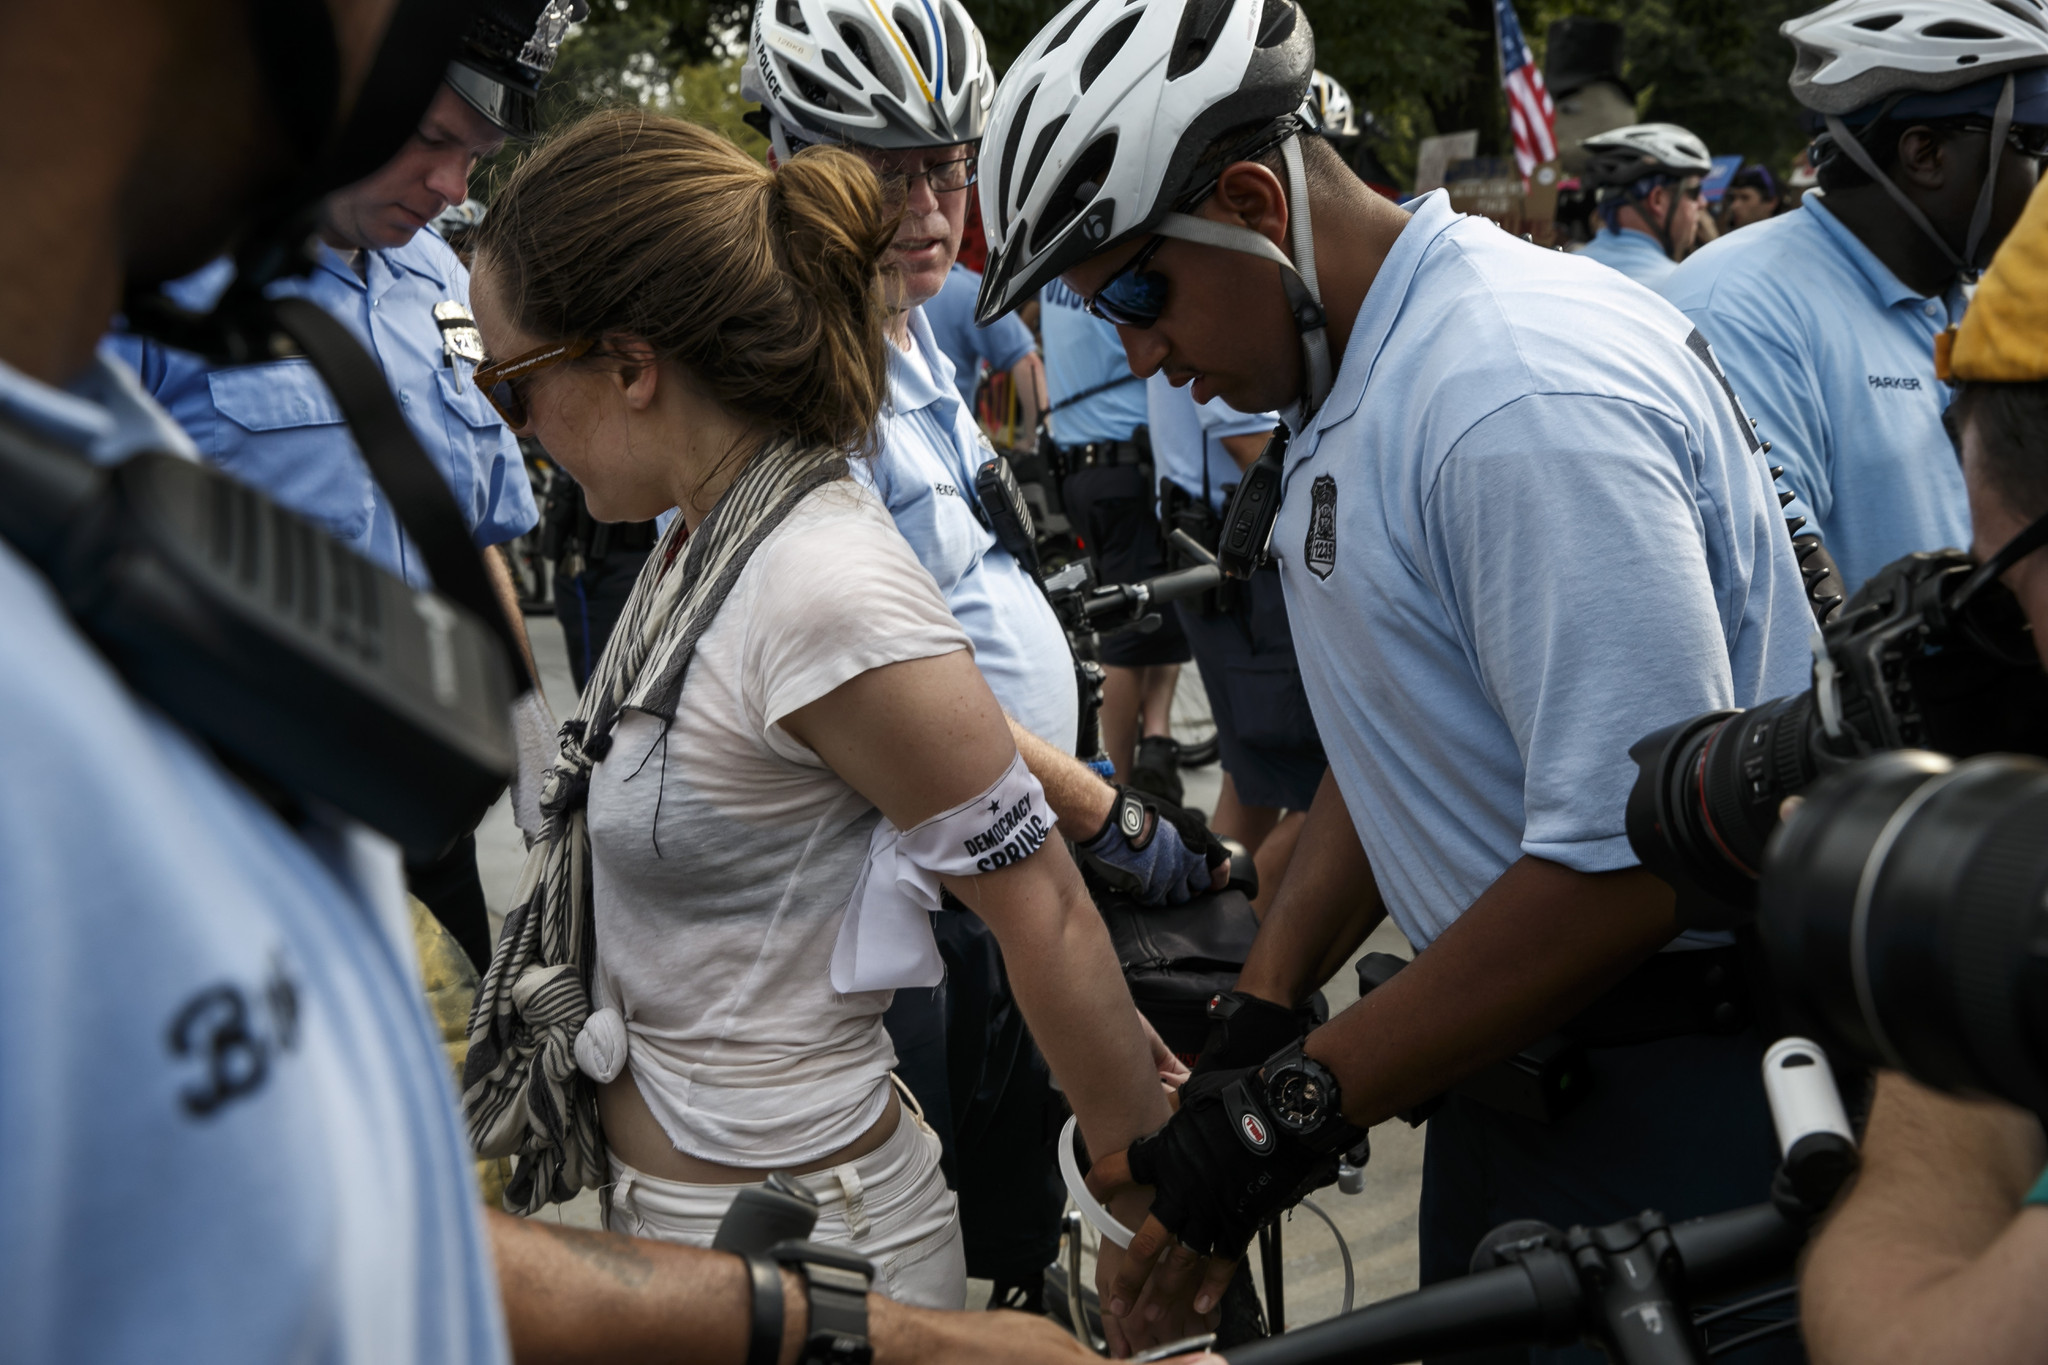 Protesters are detained and cited as they climb past a barrier set up by police at the Democratic National Convention